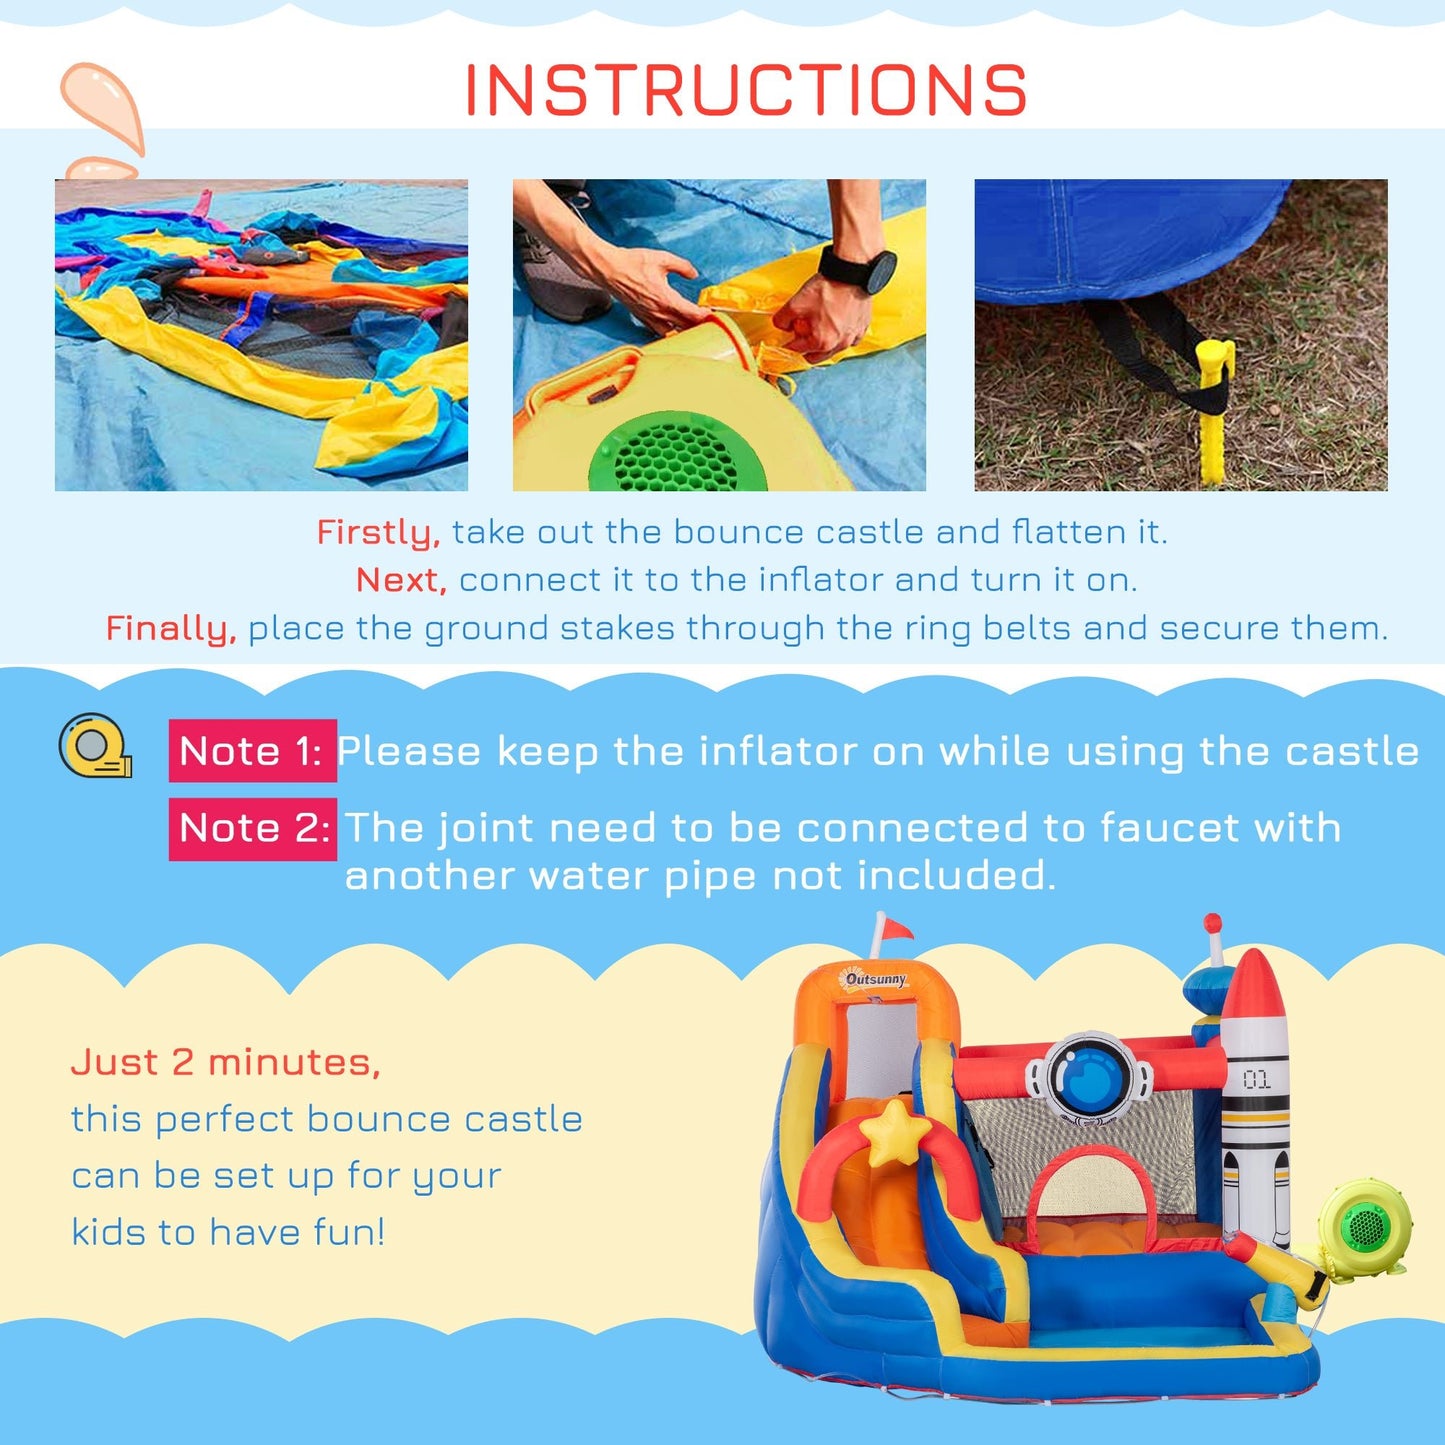 Miscellaneous-5-in-1 Inflatable Water Slide Kids Bounce House Space Theme Water Park Includes Slide Trampoline Pool Cannon Climbing Wall & 450W Air Blower - Outdoor Style Company